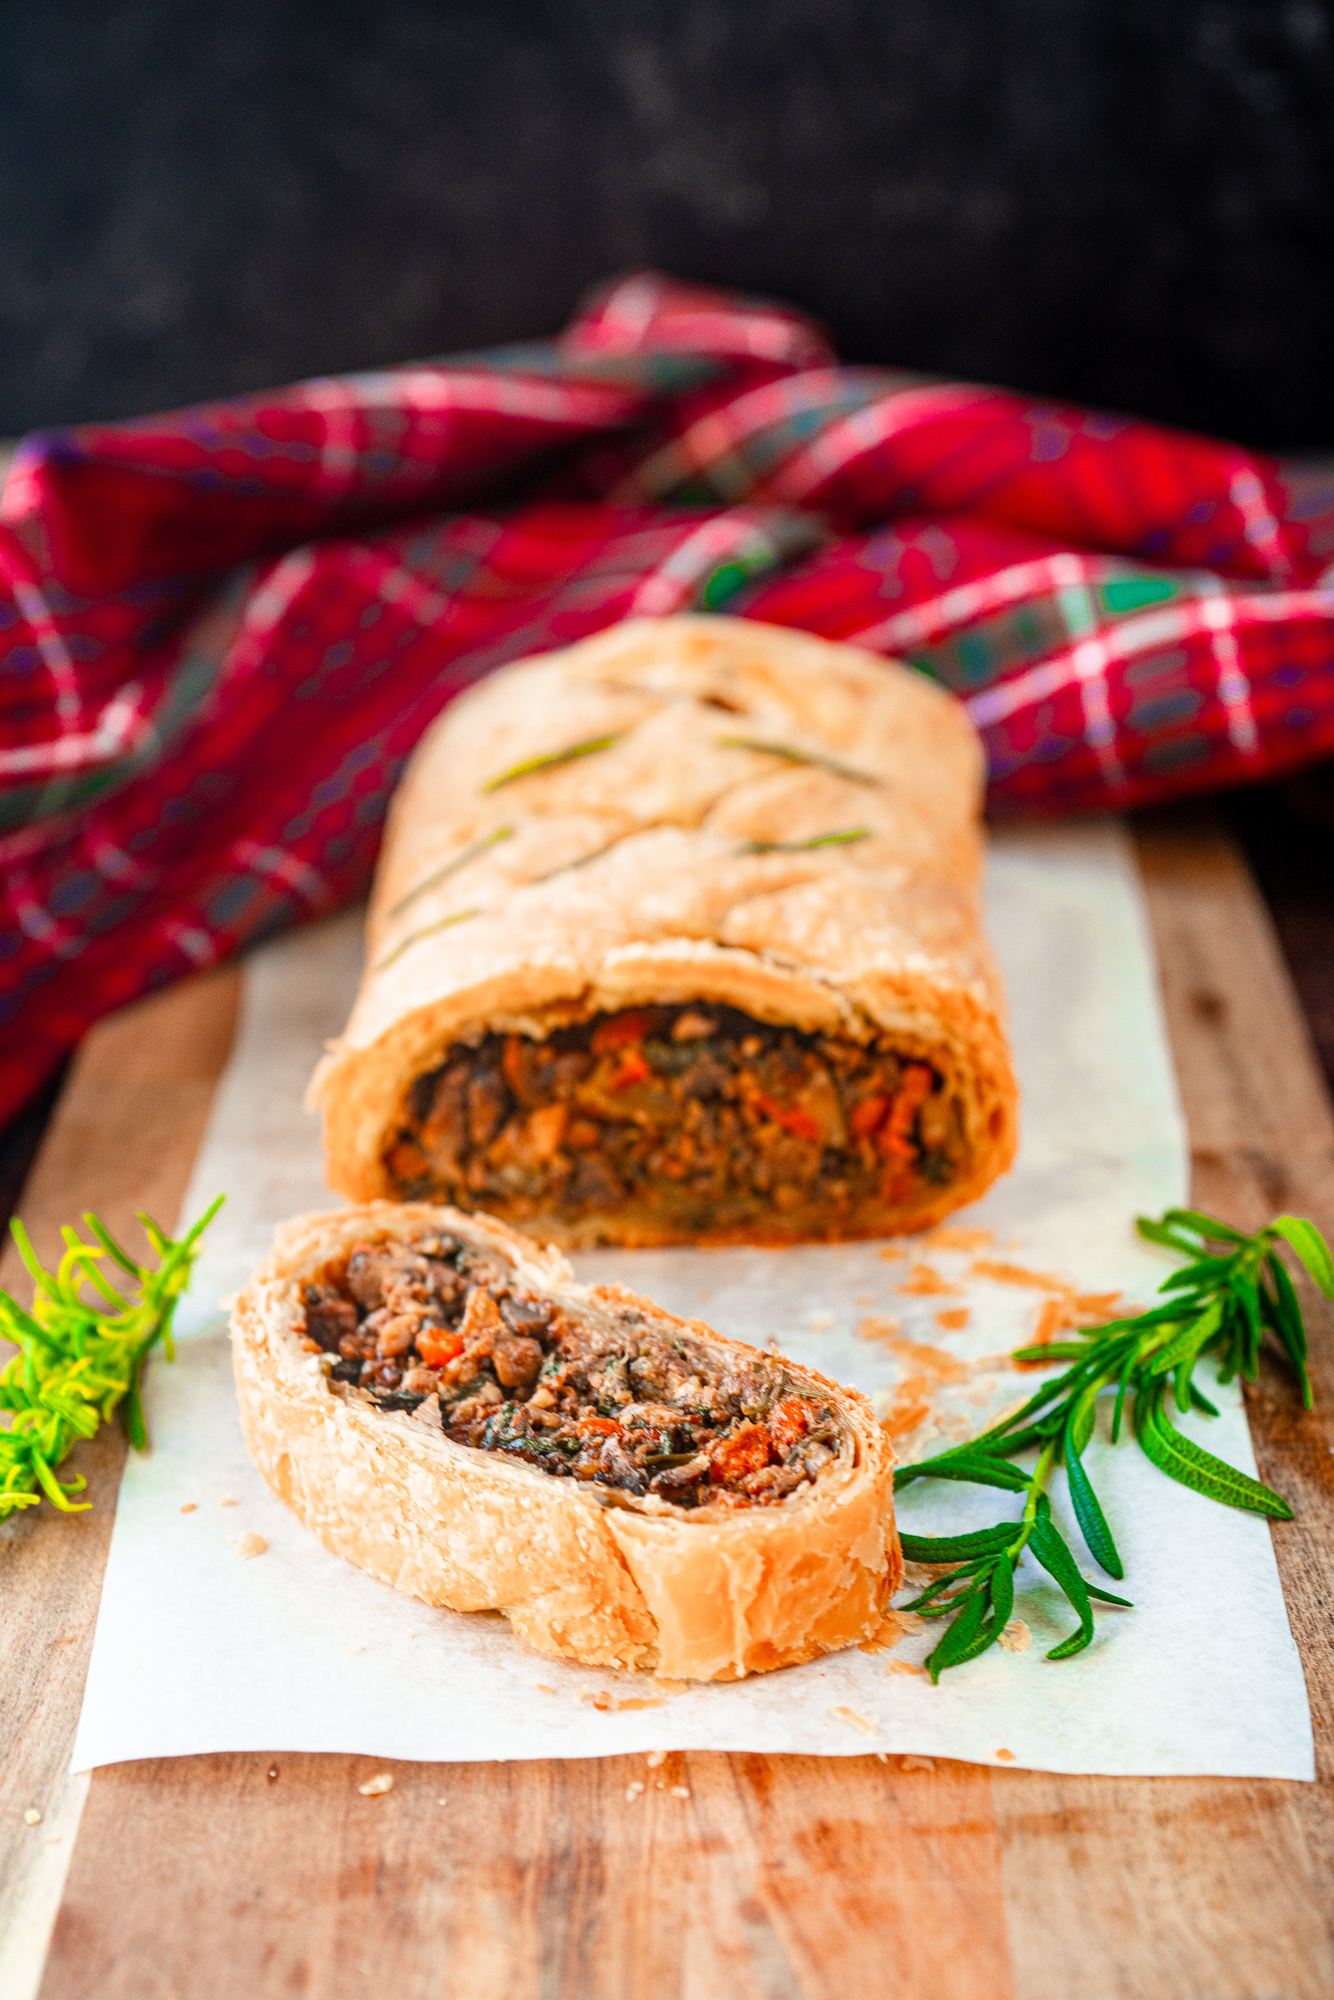 vegan wellington with mushrooms cut into slices with rosemary